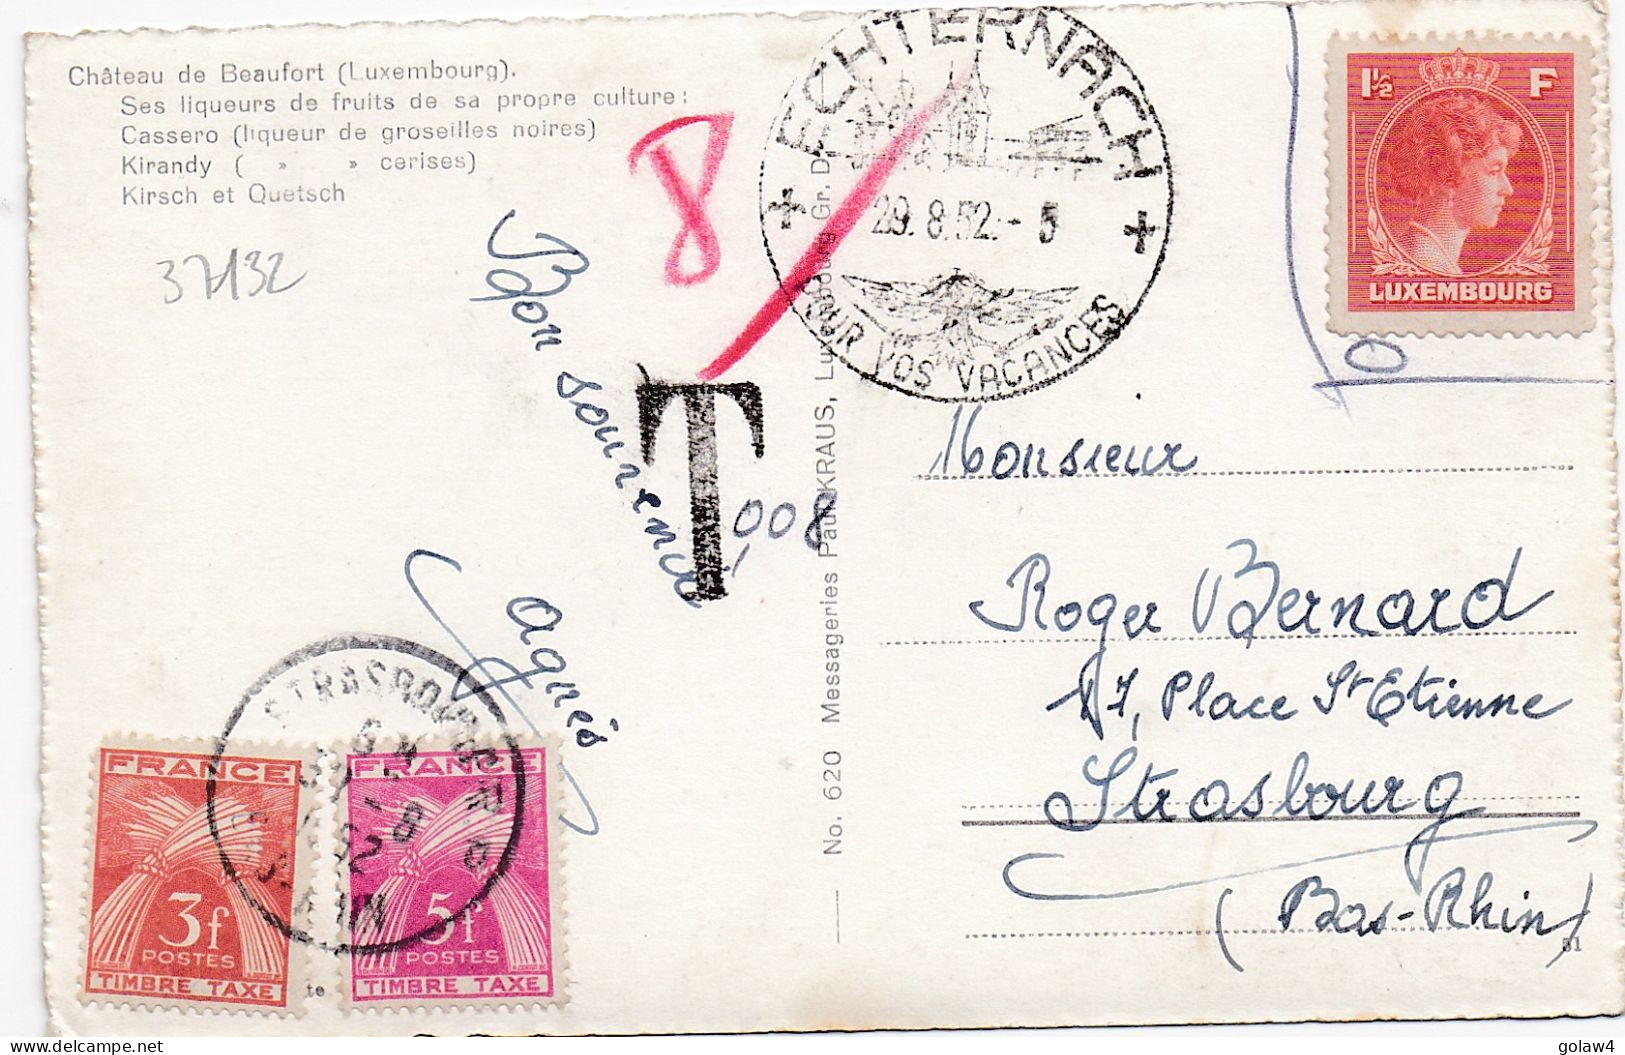 37132# CARTE POSTALE BEAUFORT ECHTERNACH TIMBRE LUXEMBOURG VALEUR NULLE TAXE GERBE Obl STRASBOURG BAS RHIN 1952 - Covers & Documents